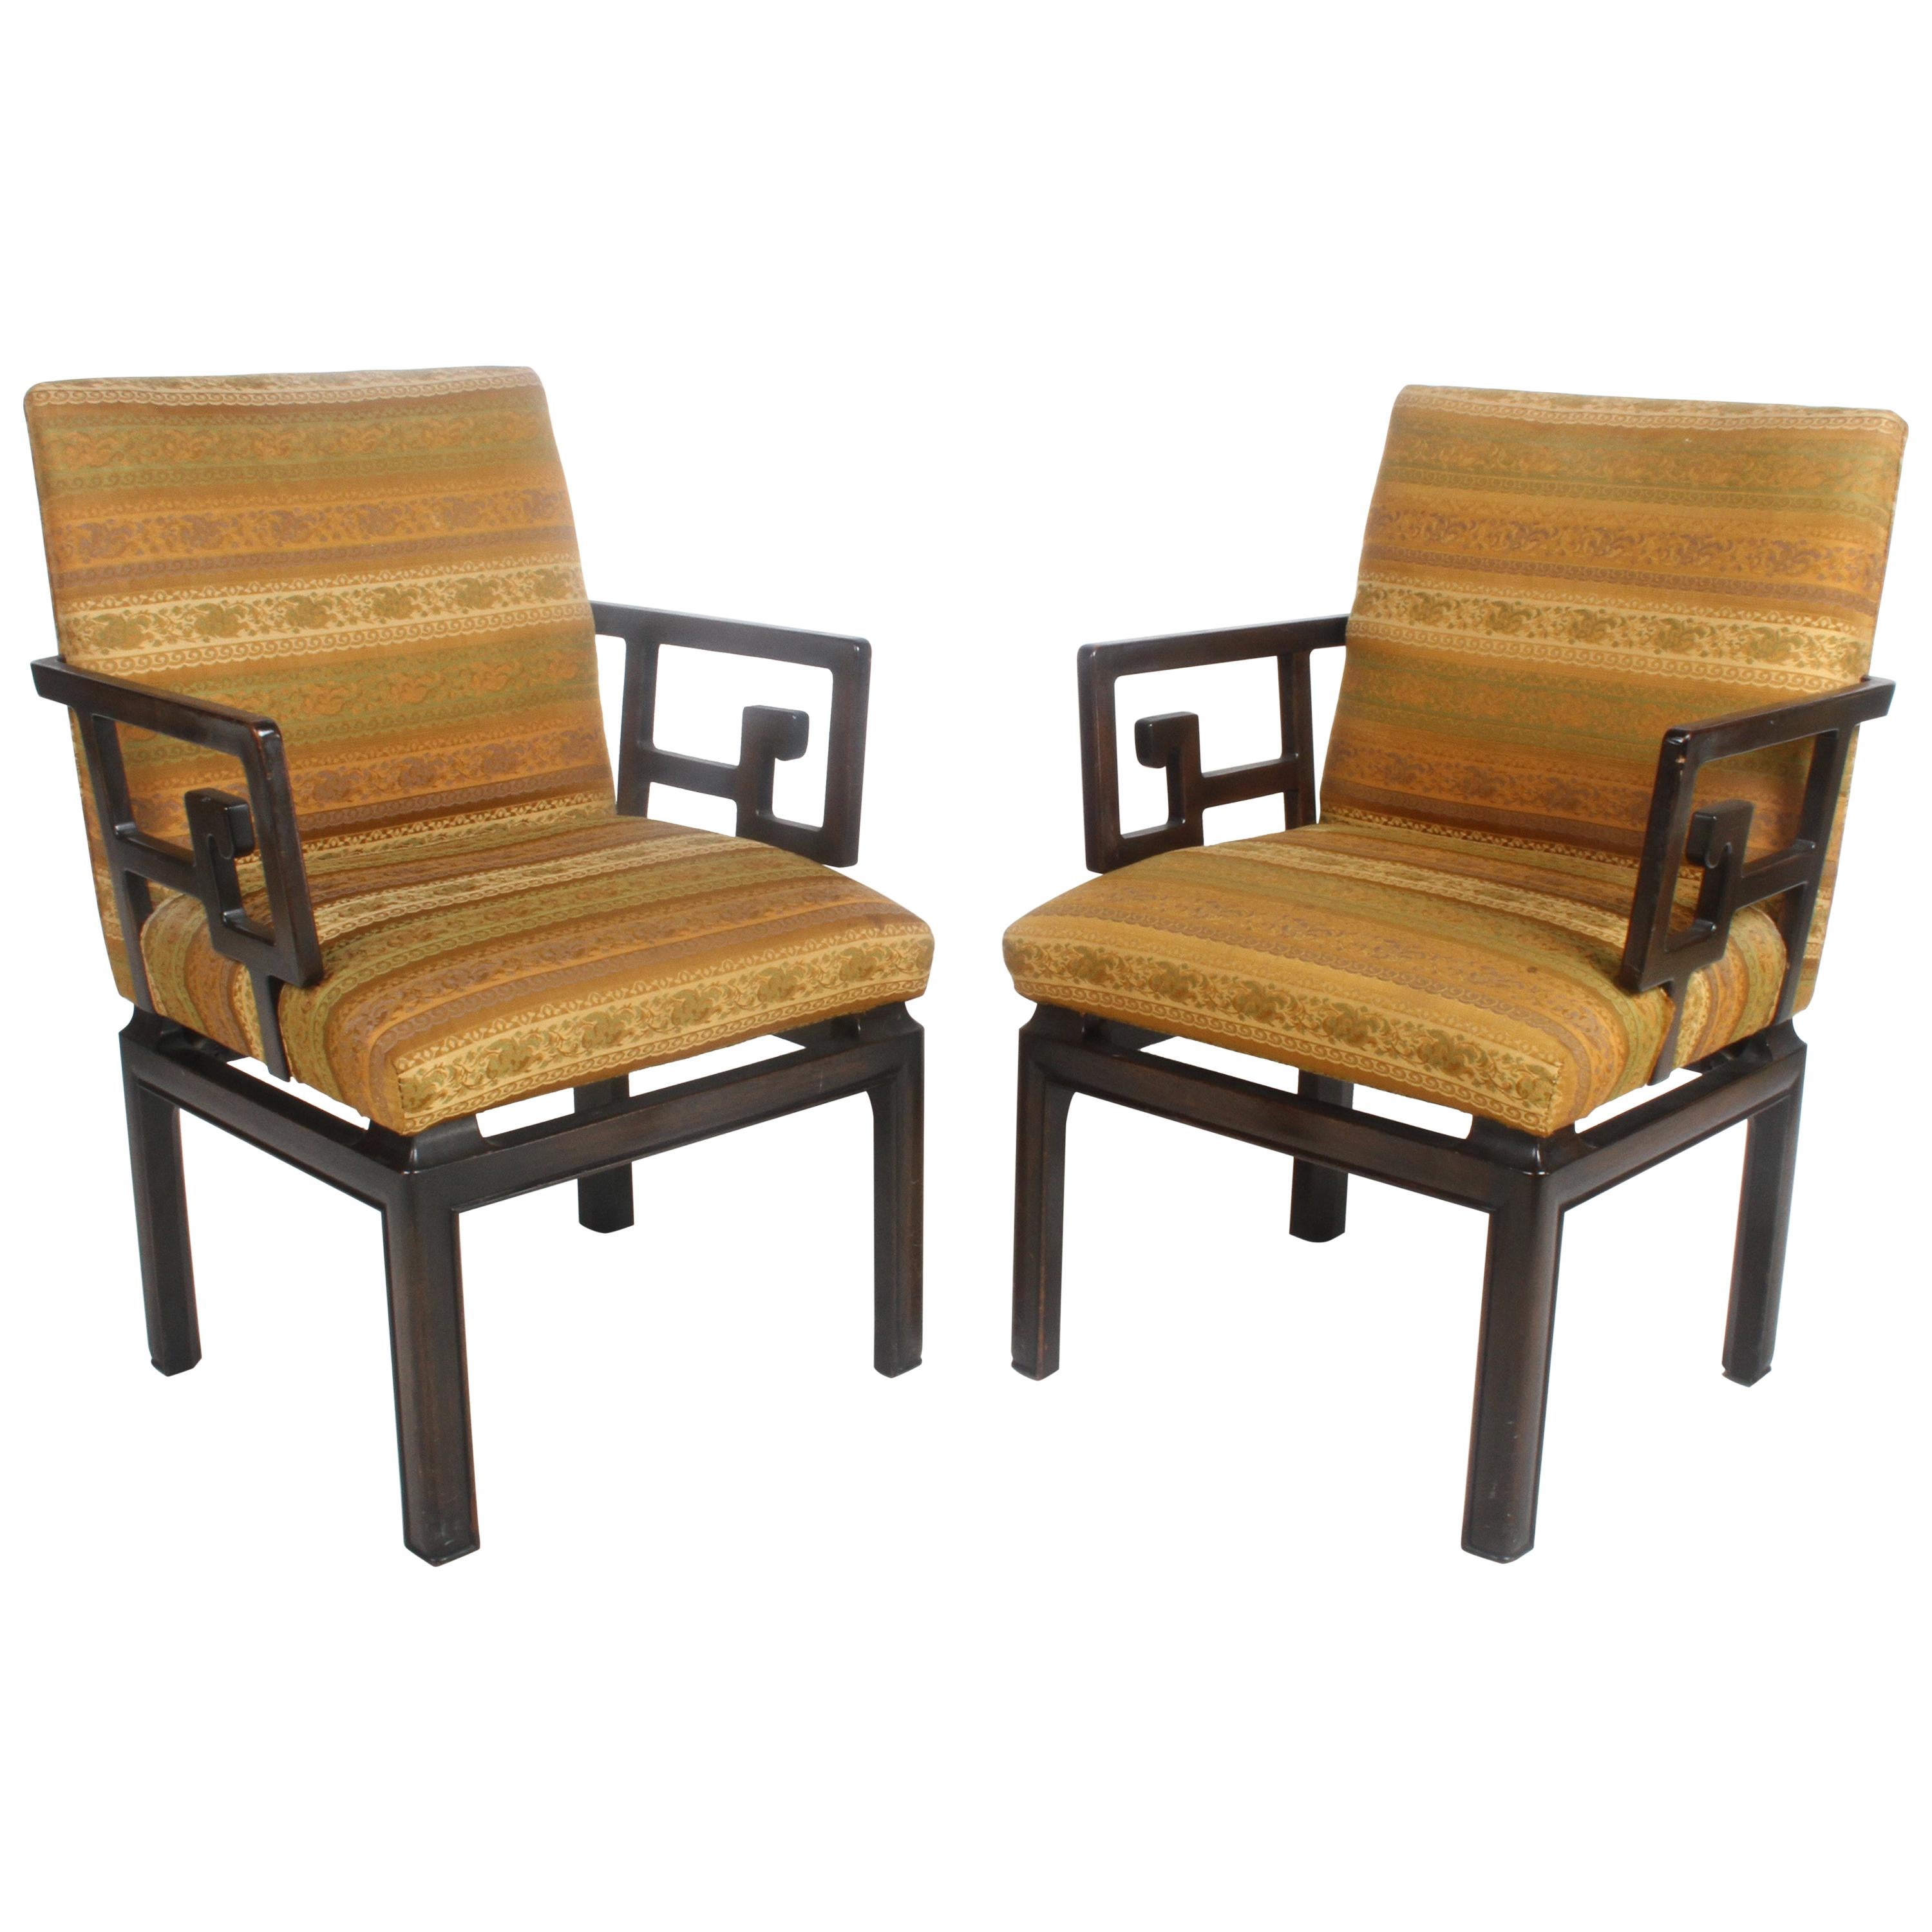 Pair of Baker Far East Greek Key Dining or Occasional Chairs